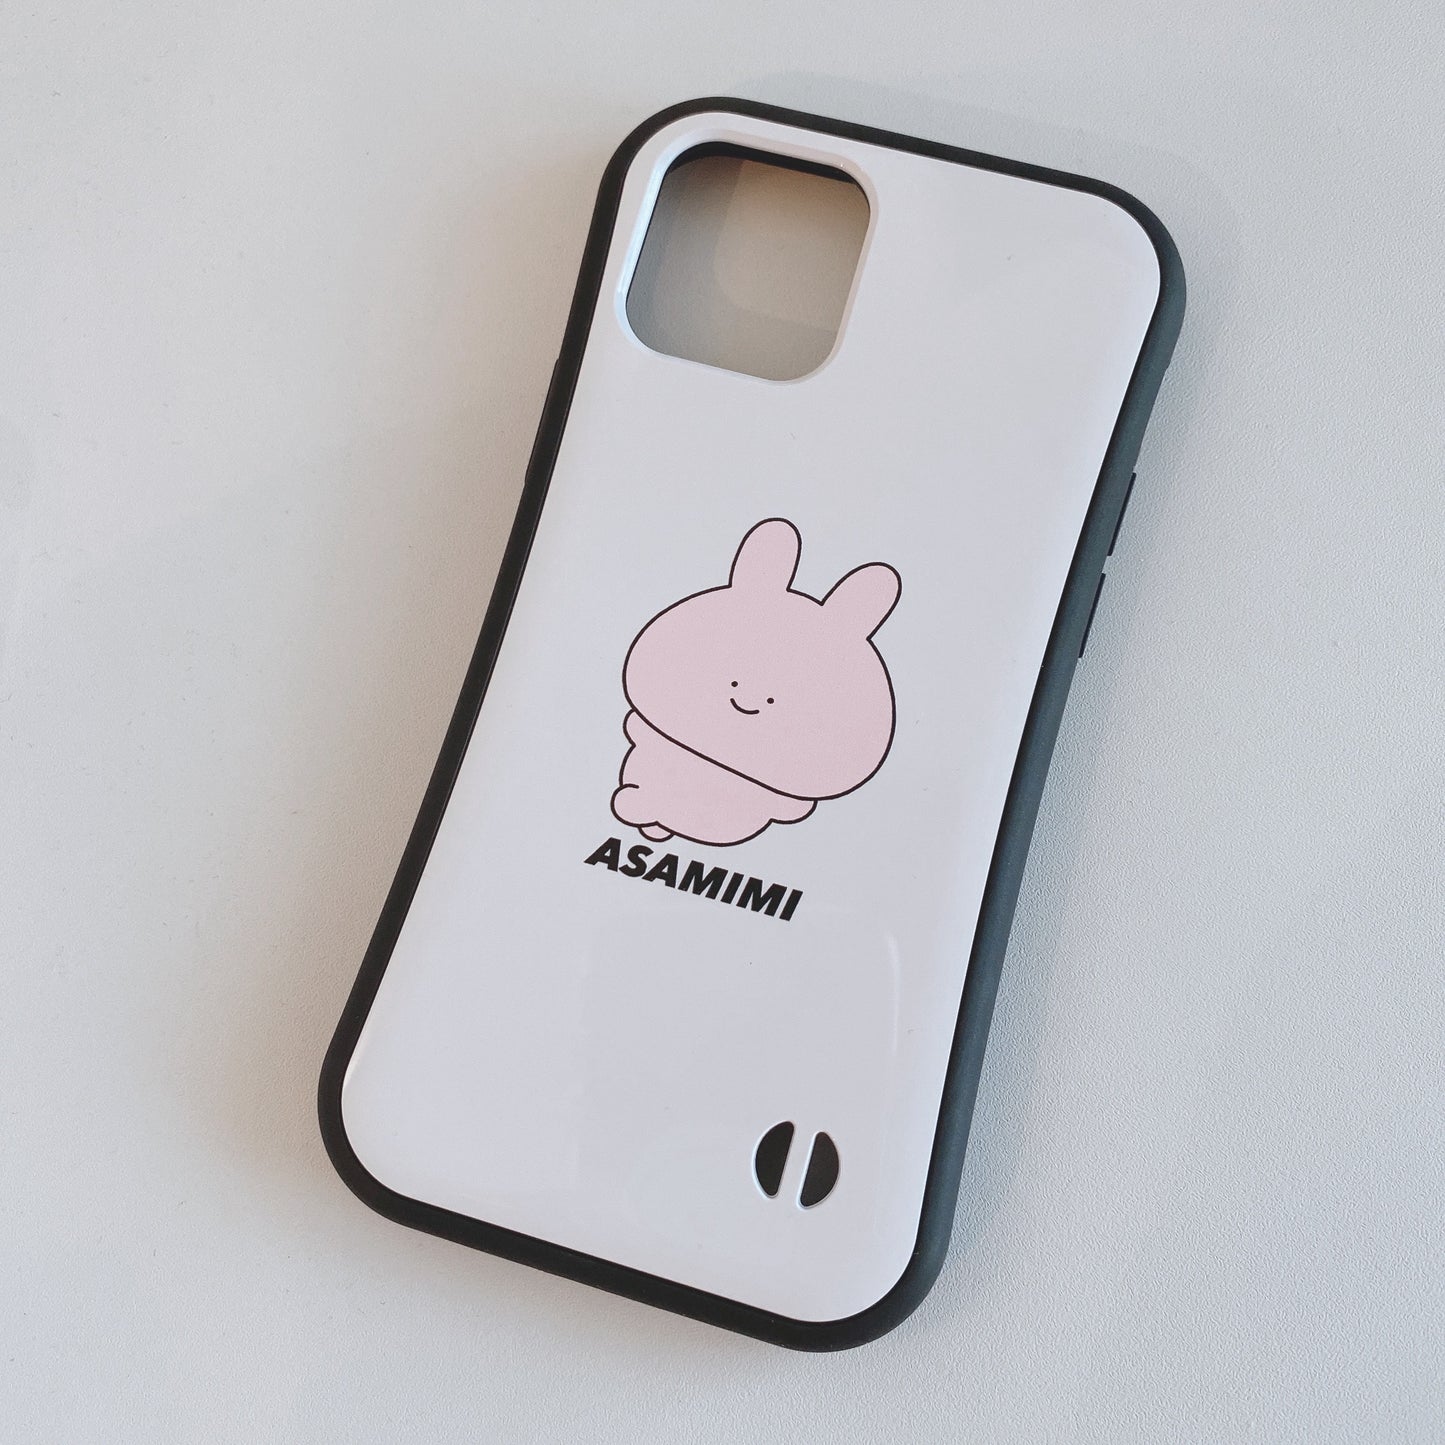 [Asamimi-chan] Smartphone tough case for iPhone [Made-to-order]